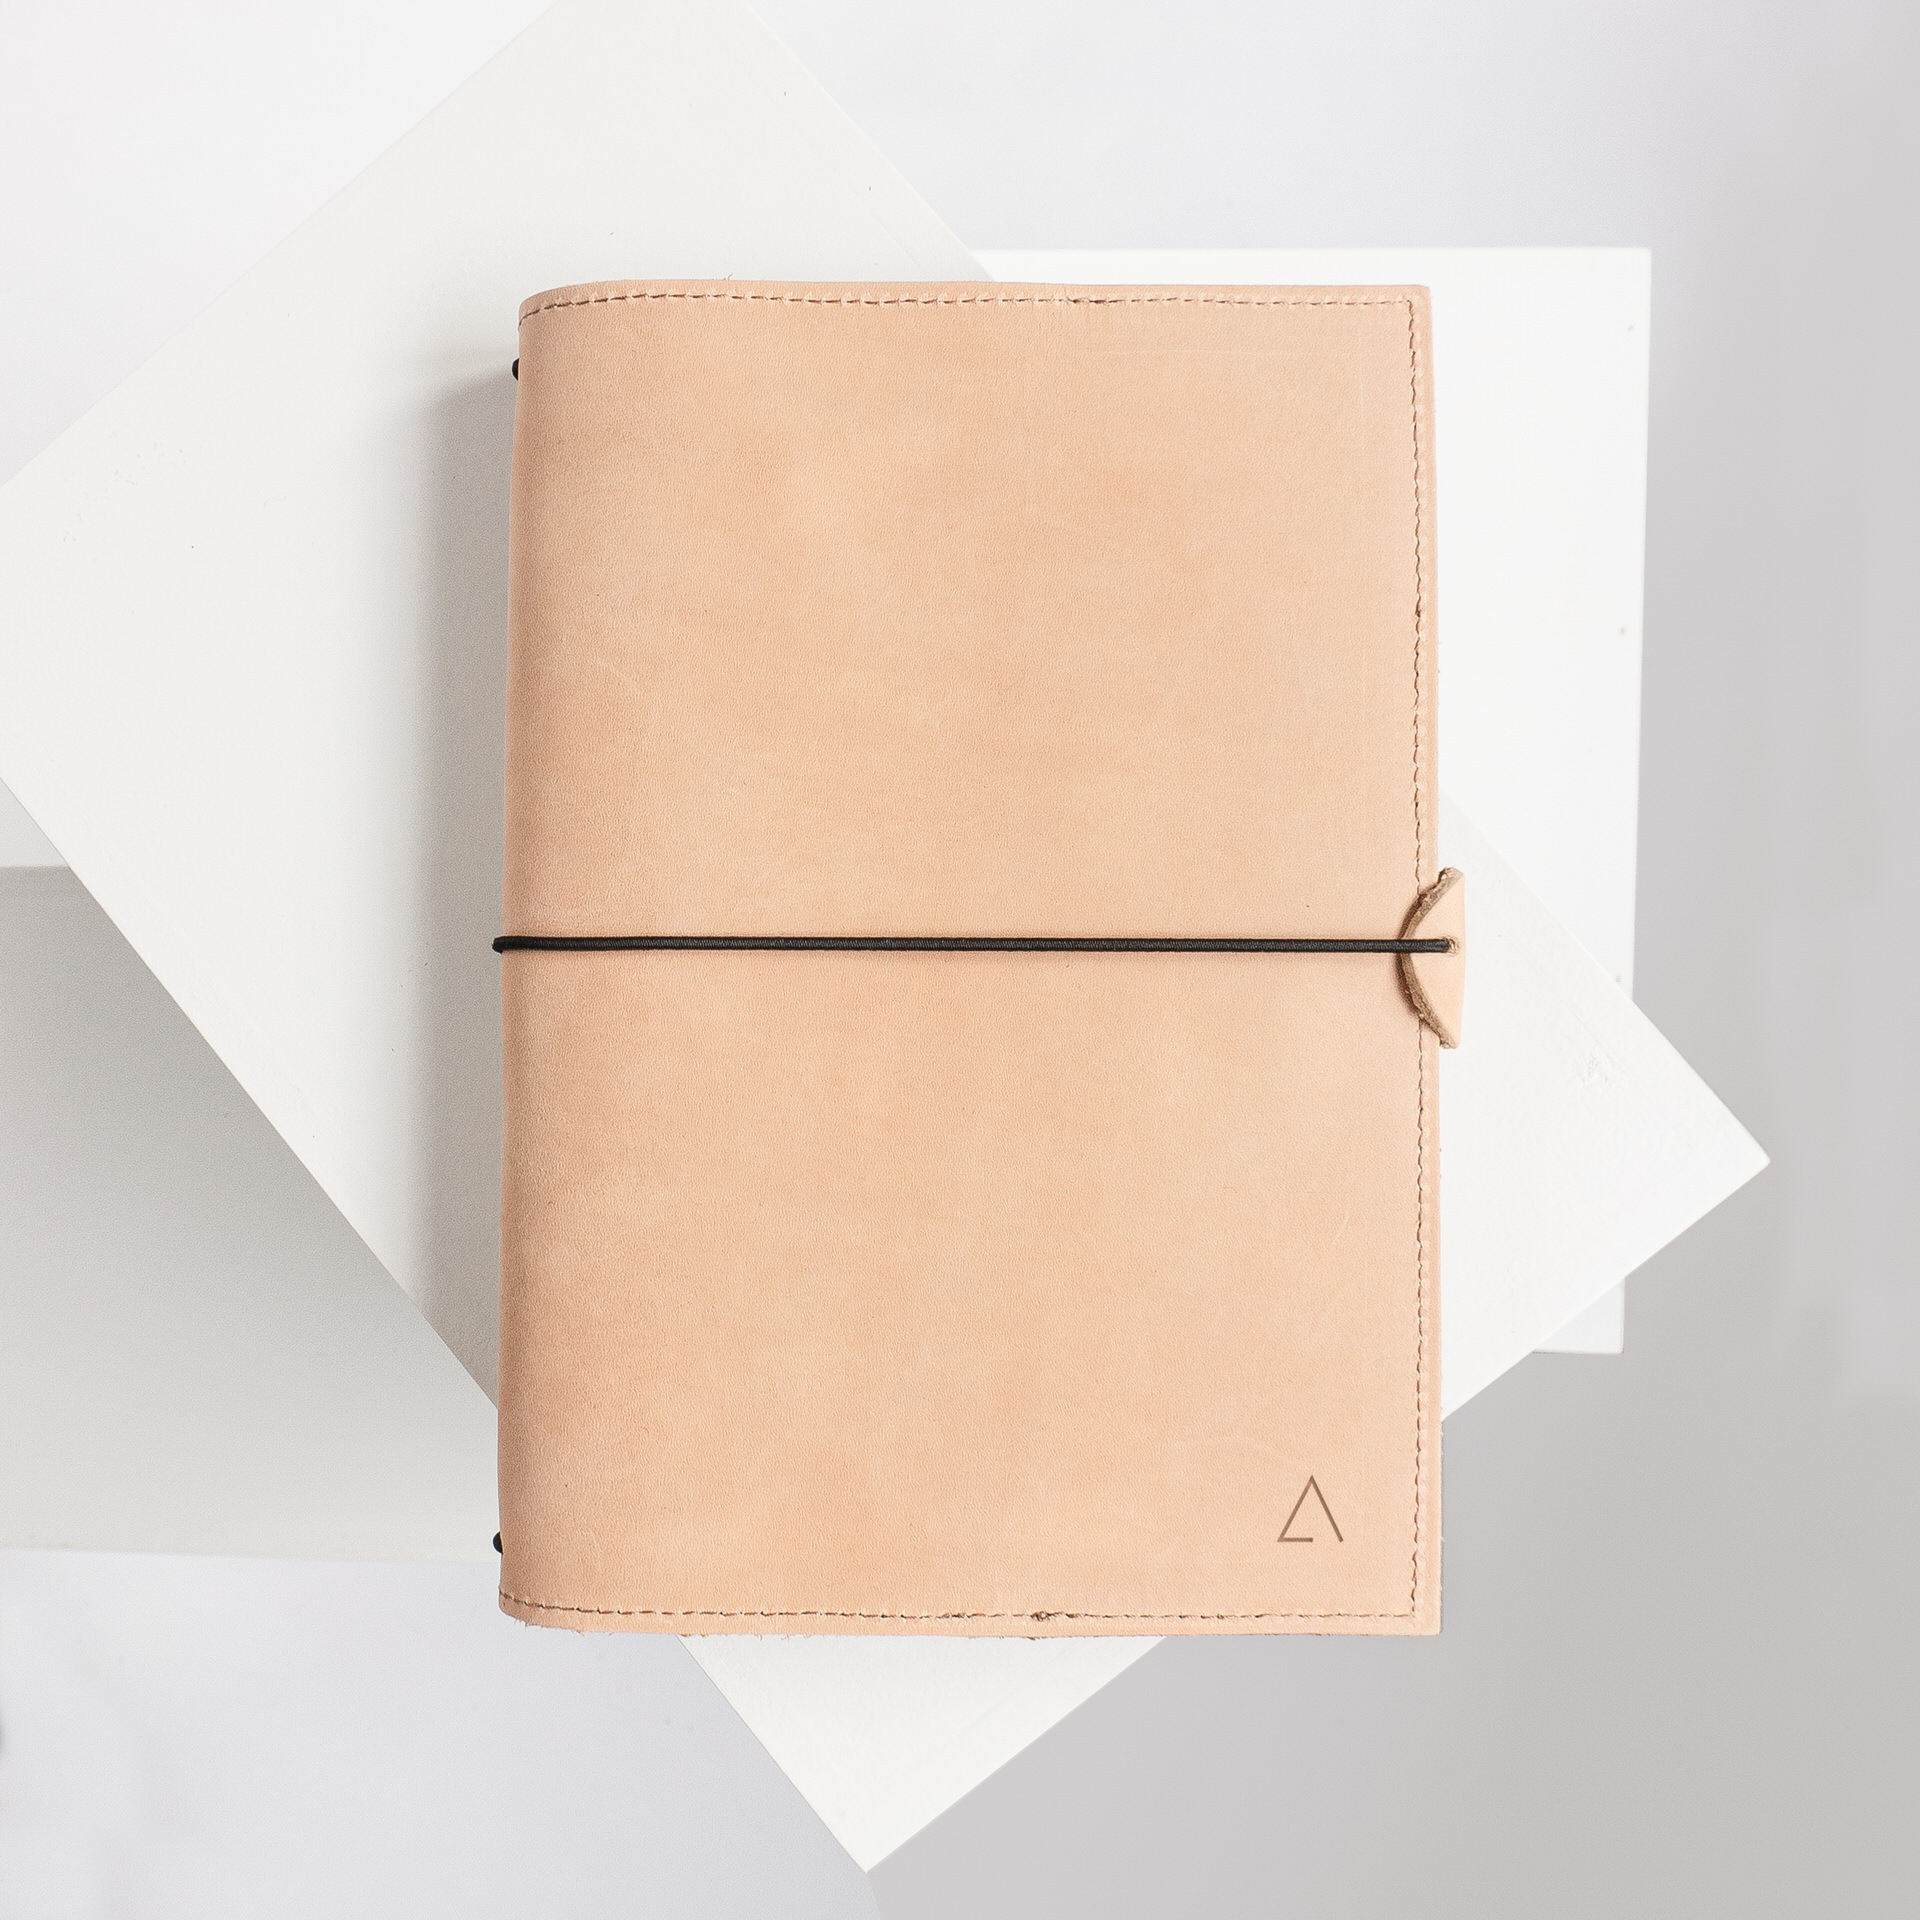 Notebook cover NOA A5 in the color light brown.